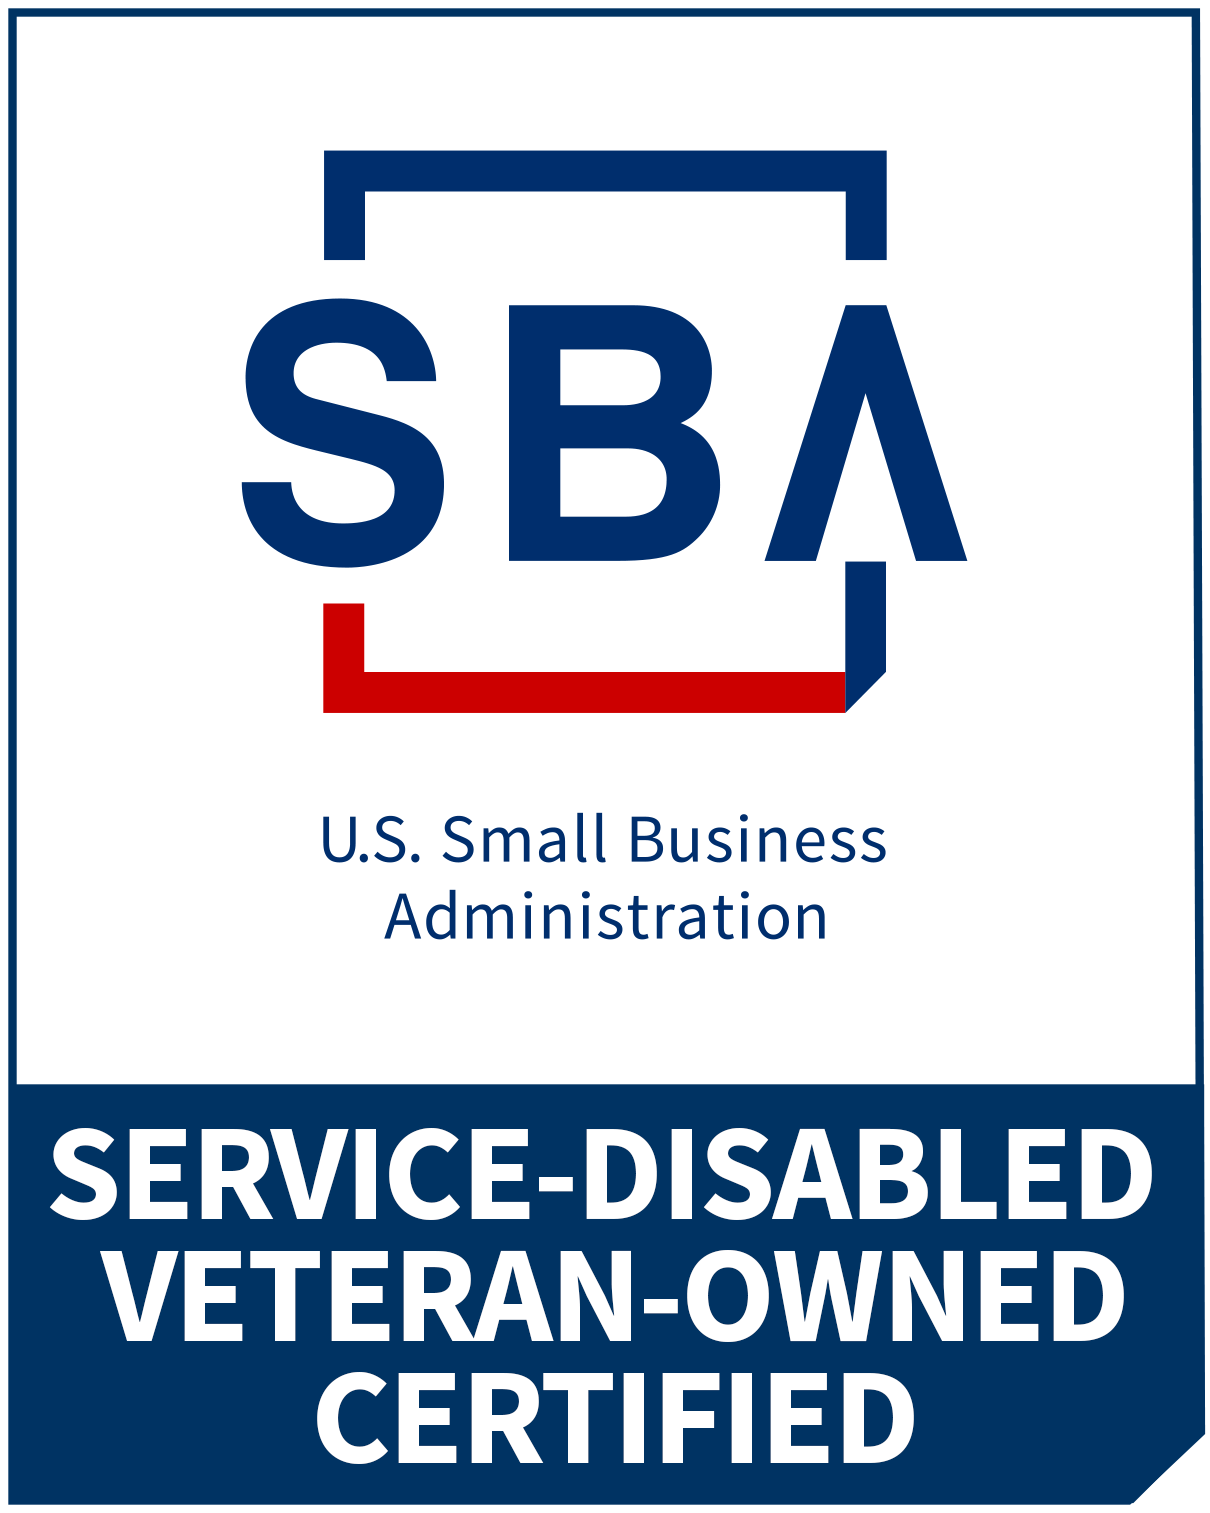 Service Disabled Veteran Owned Certified